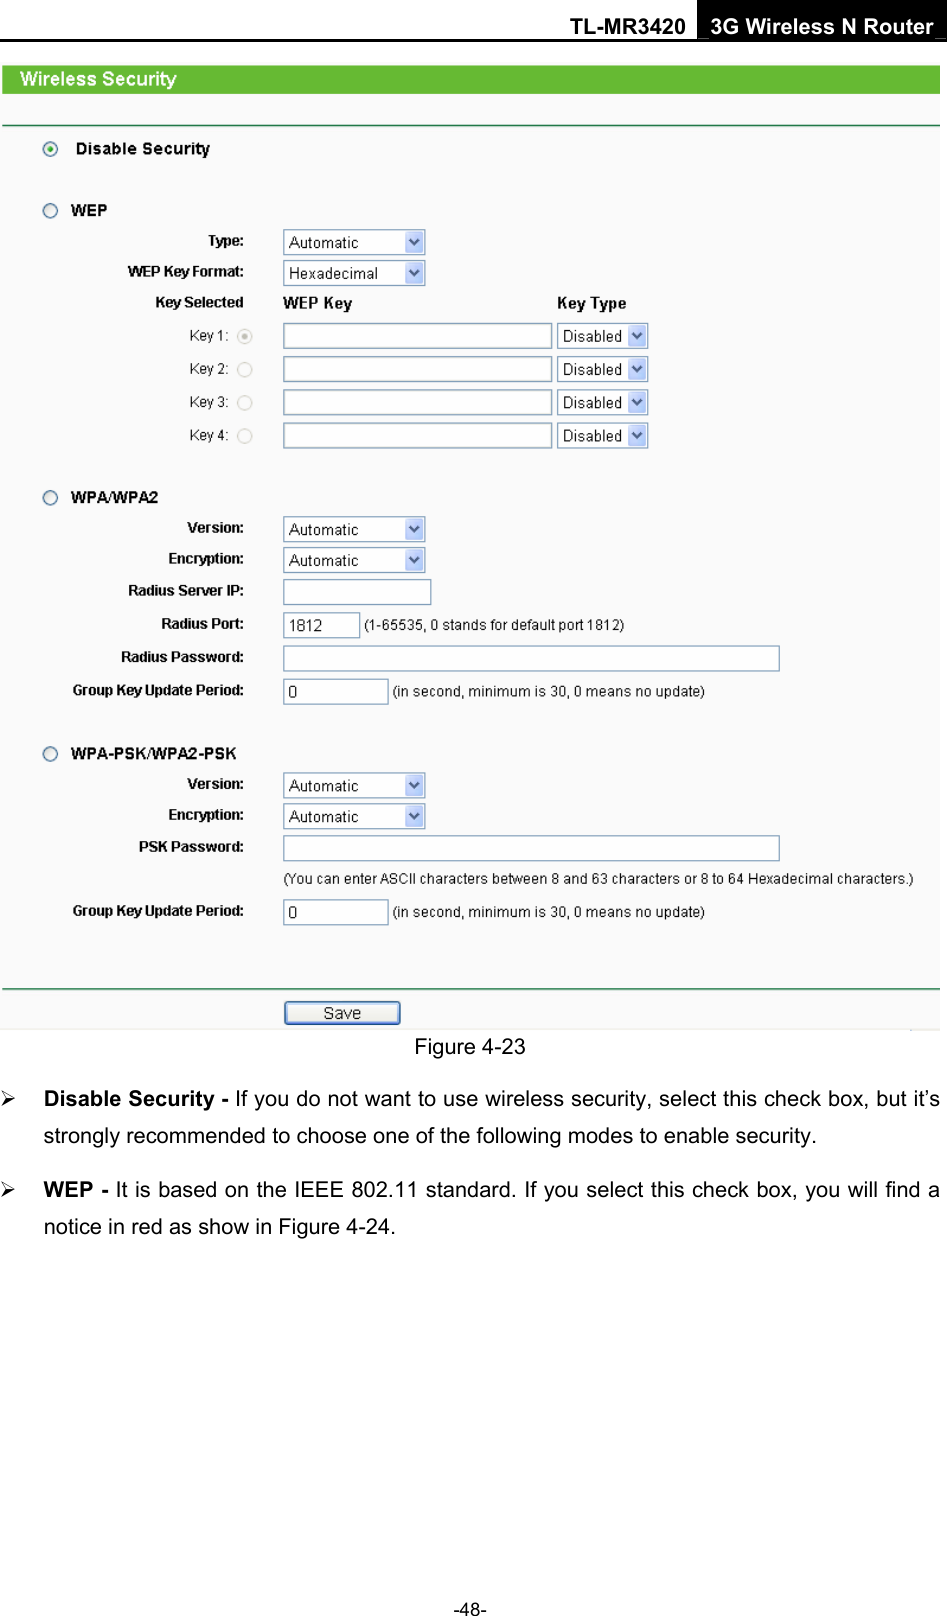 TL-MR3420 3G Wireless N Router -48-  Figure 4-23   ¾ Disable Security - If you do not want to use wireless security, select this check box, but it’s strongly recommended to choose one of the following modes to enable security. ¾ WEP - It is based on the IEEE 802.11 standard. If you select this check box, you will find a notice in red as show in Figure 4-24.   